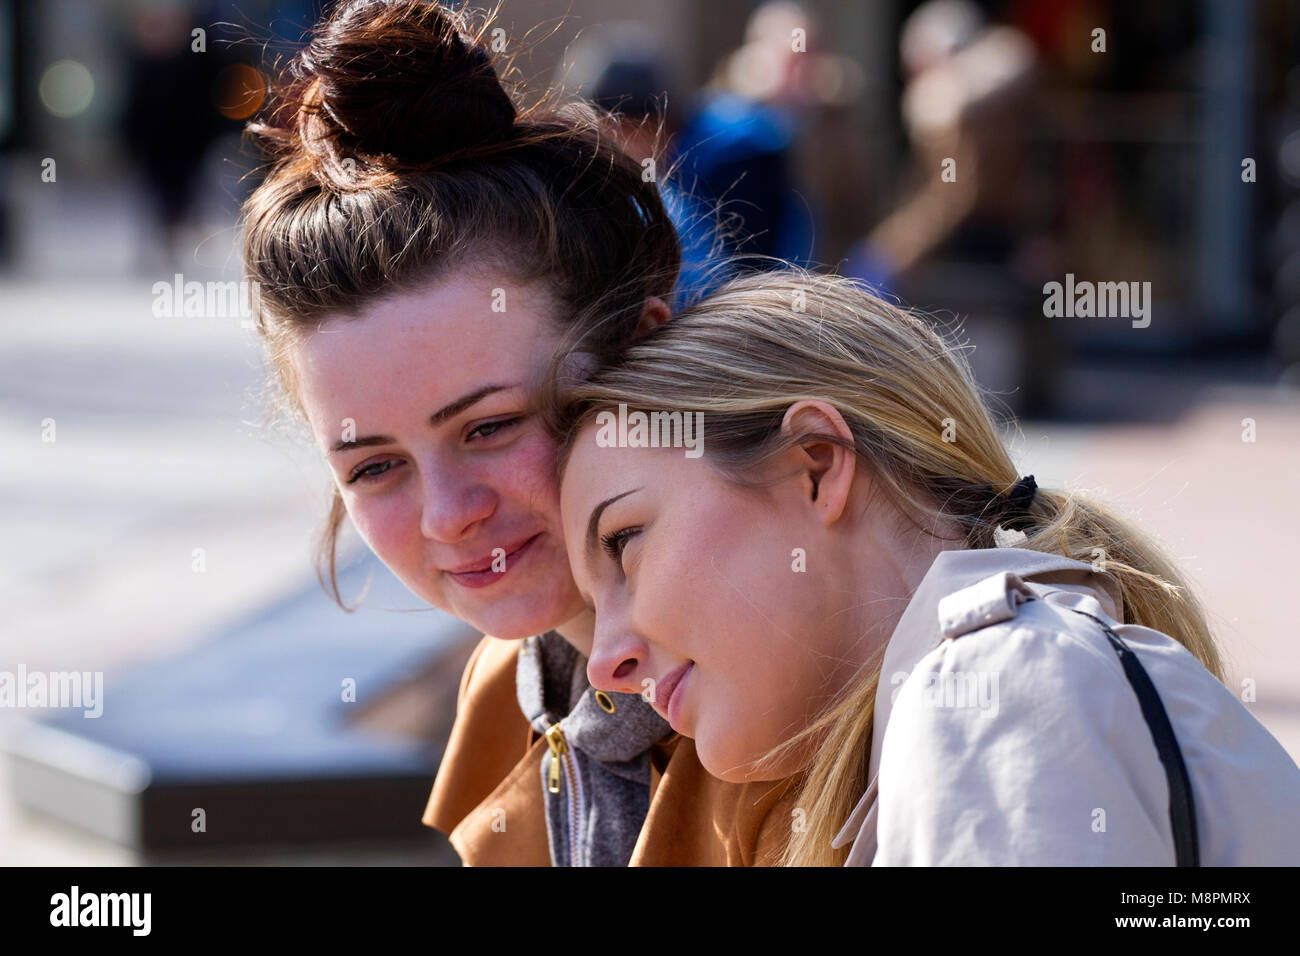 Dundee, Tayside, Scotland, UK. 19th March, 2018. UK weather: Two young female friends seated close together enjoying the mild sunny spring day in Dundee city centre, UK. Credit: Dundee Photographics / Alamy Live News Stock Photo